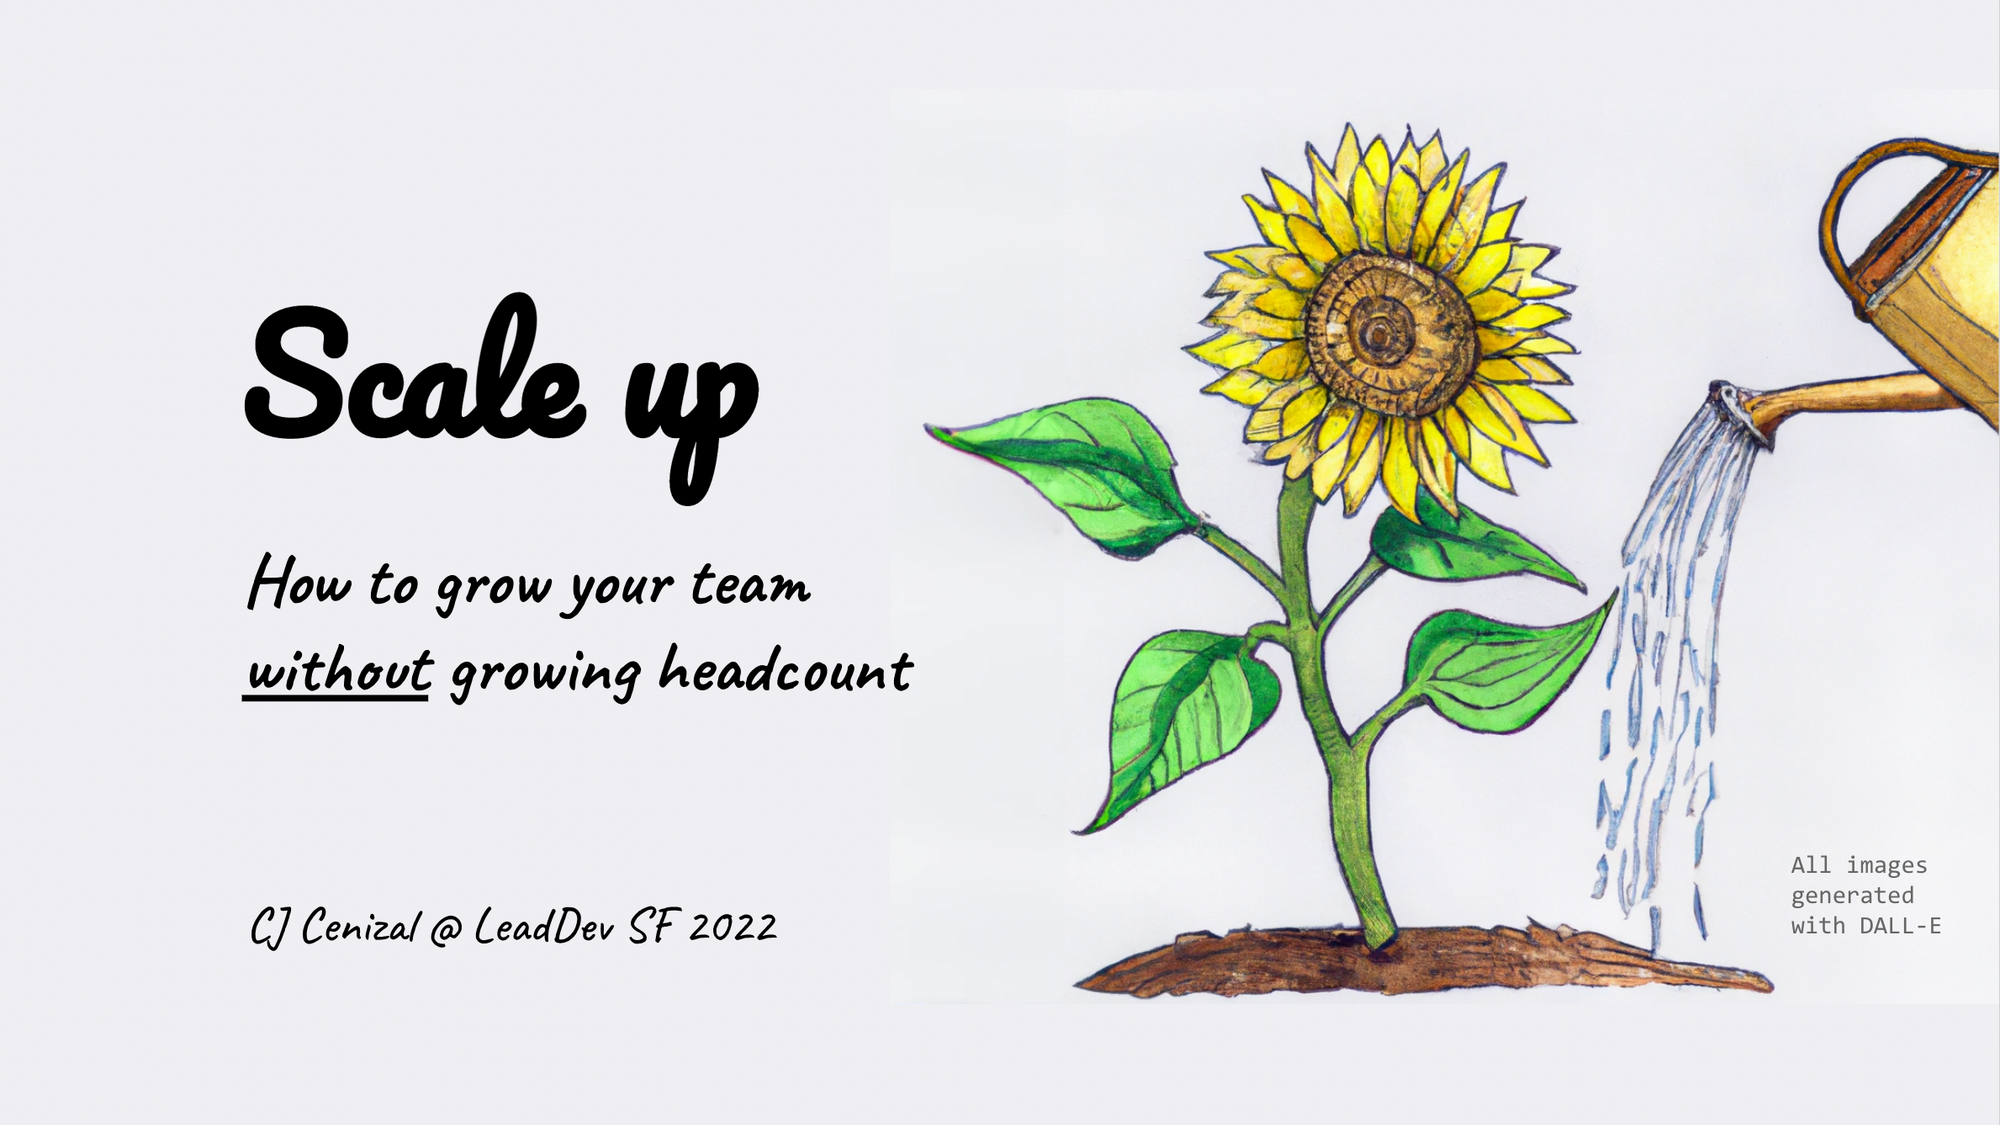 Scale up: How to grow your team without growing headcount